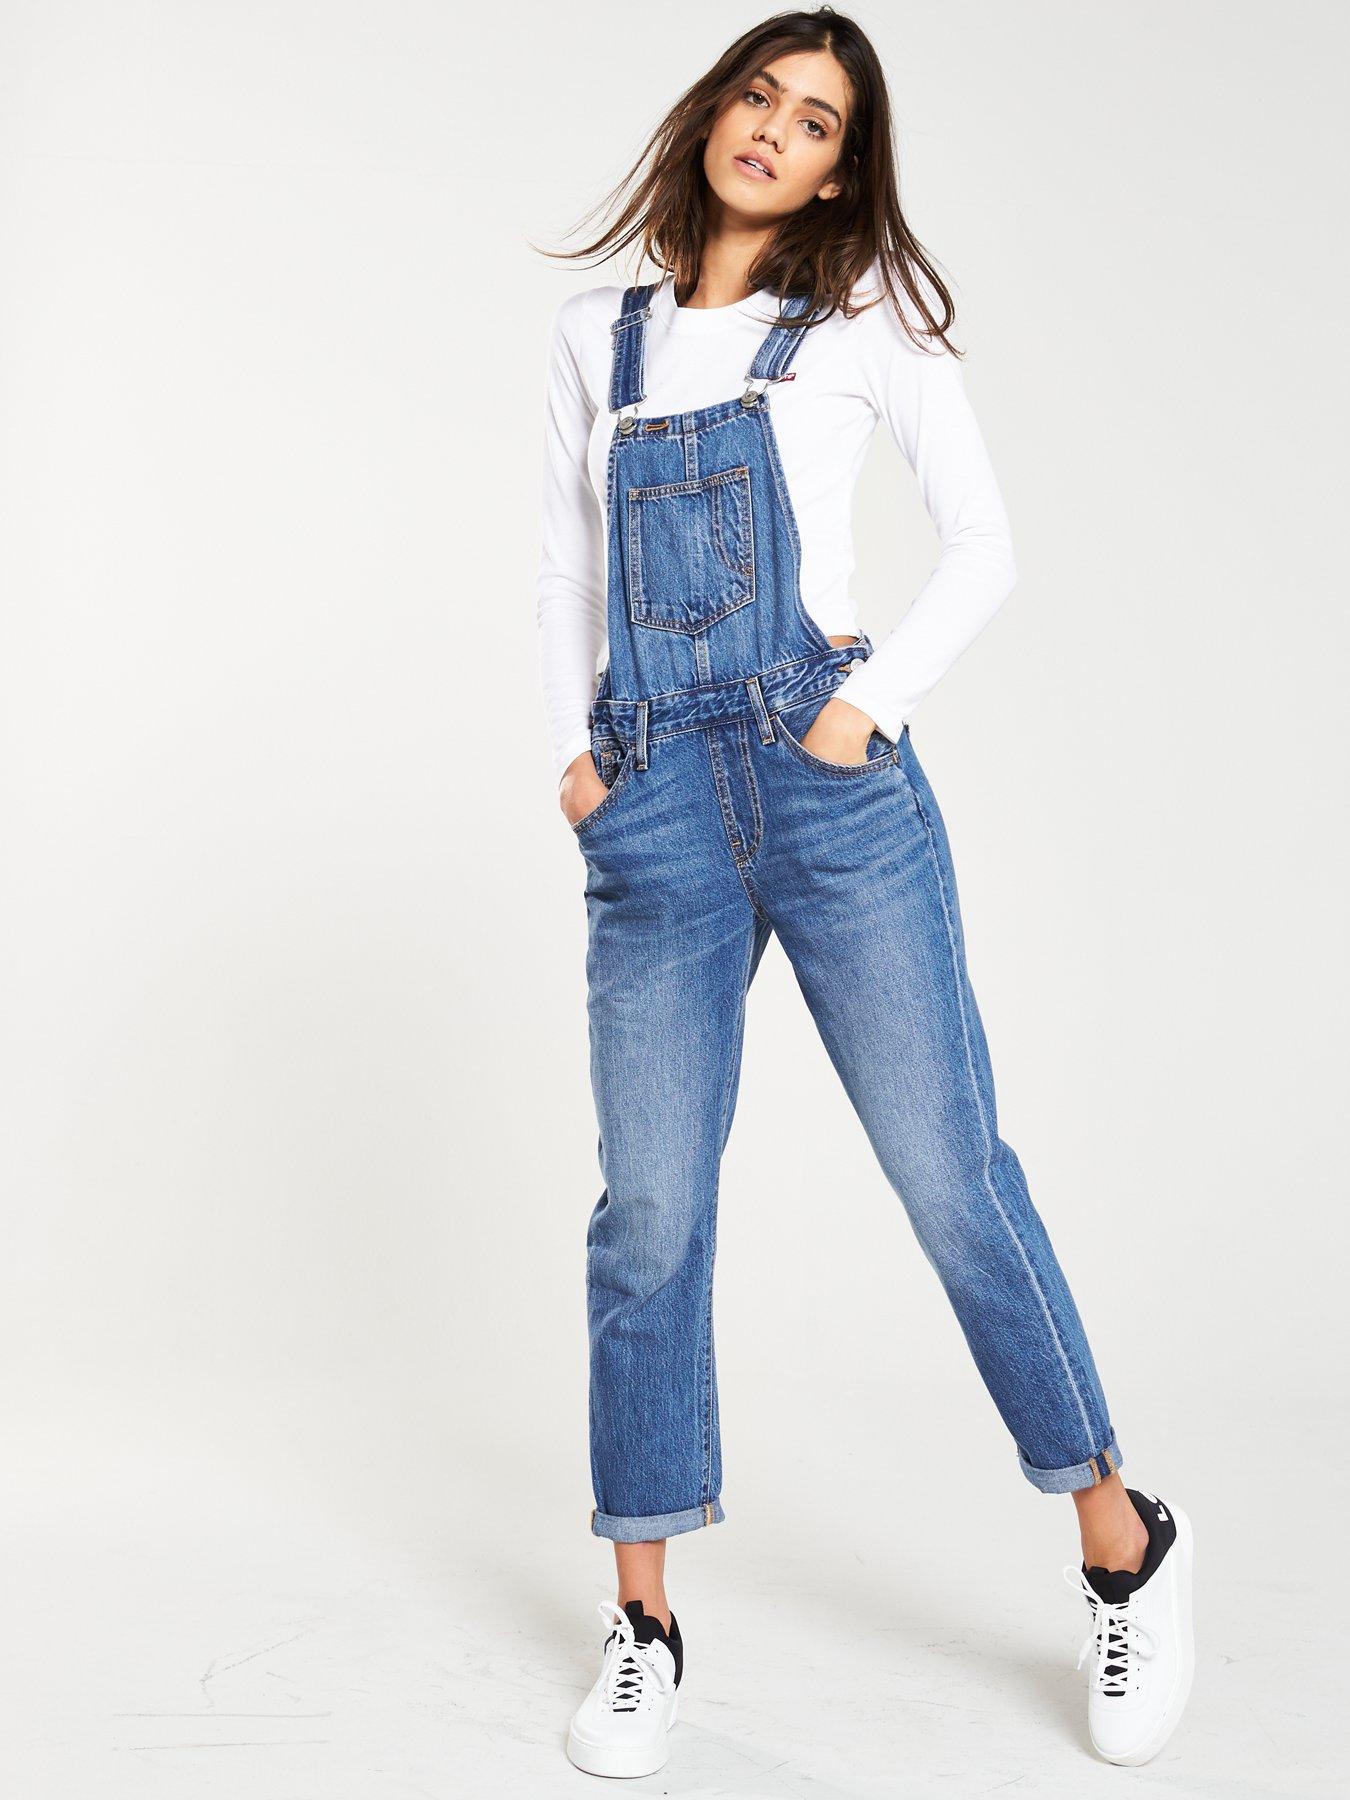 dungarees mens levis